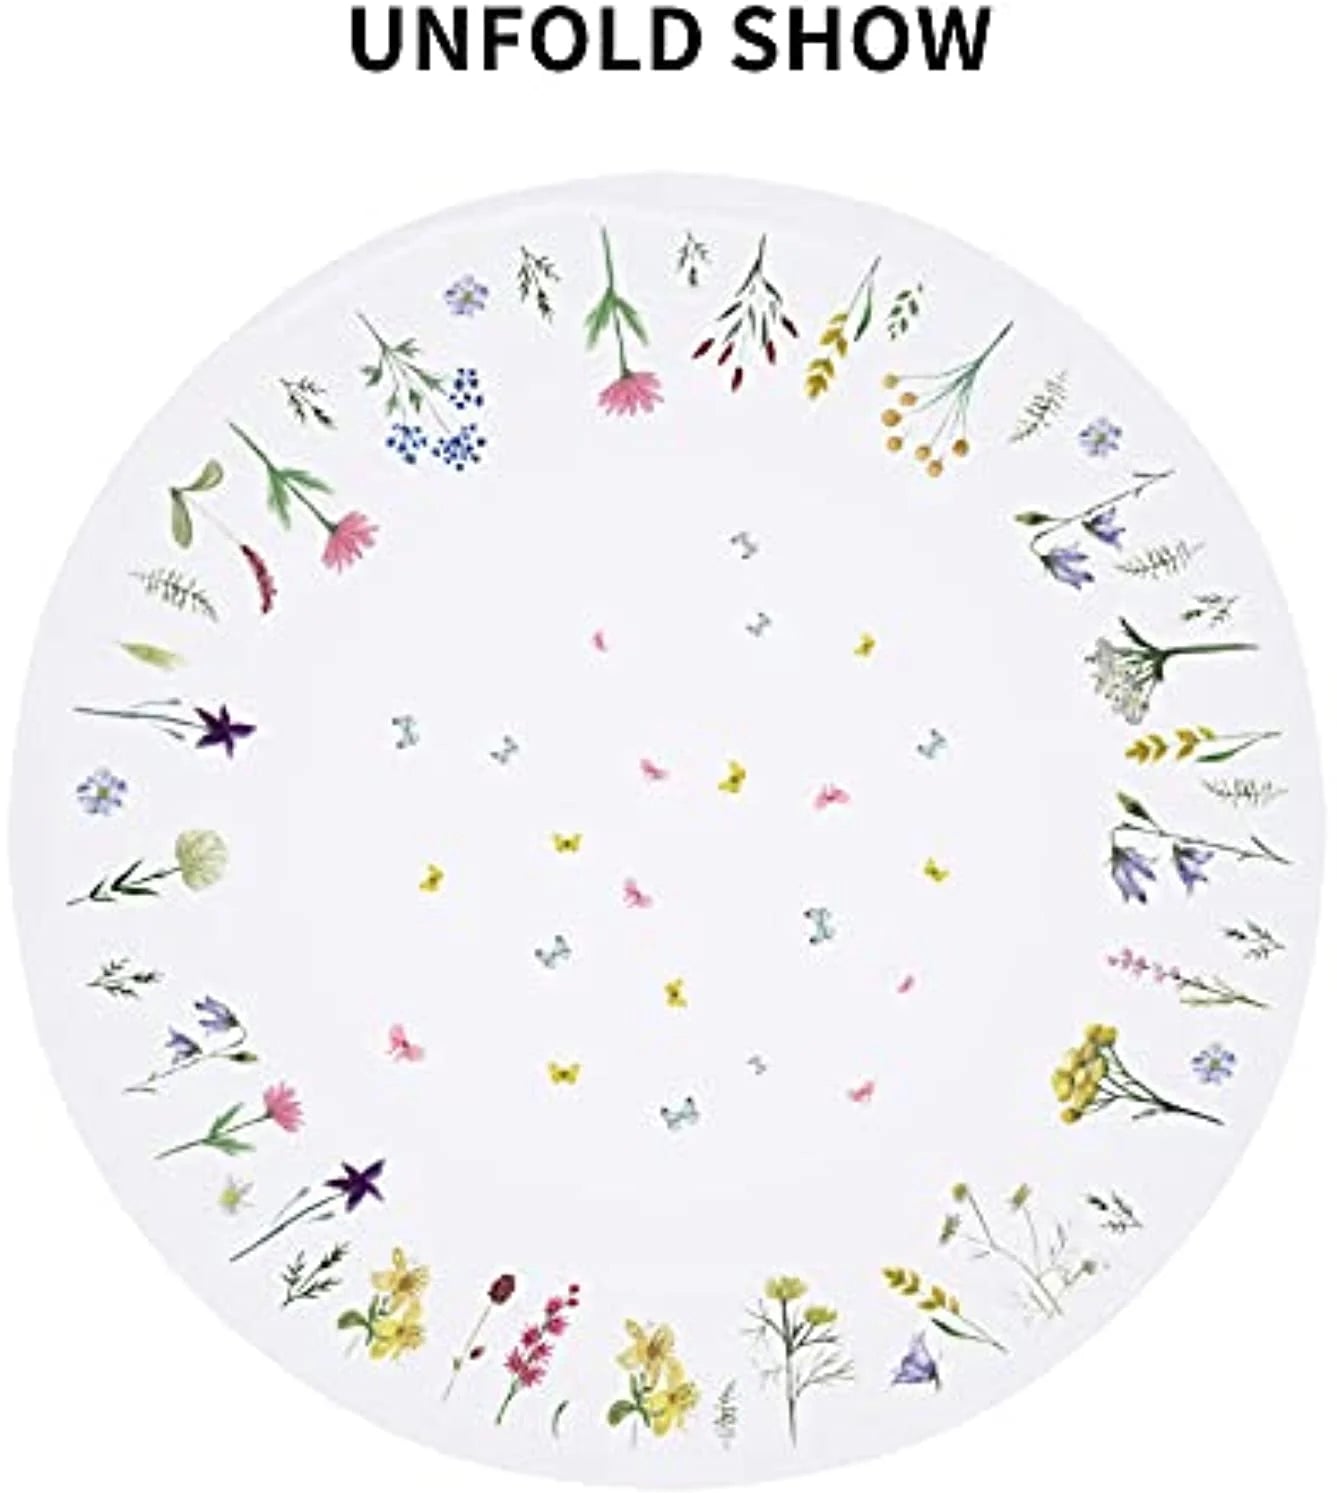 Wnoesat Round Floral Tablecloth  Butterfly Round Tablecloth 60 Inch Watercolor Floral Table Cloth Waterproof Tablecloths for Round Tables Polyester Round Table Cover Protector for Dining Room Indoor Outdoor